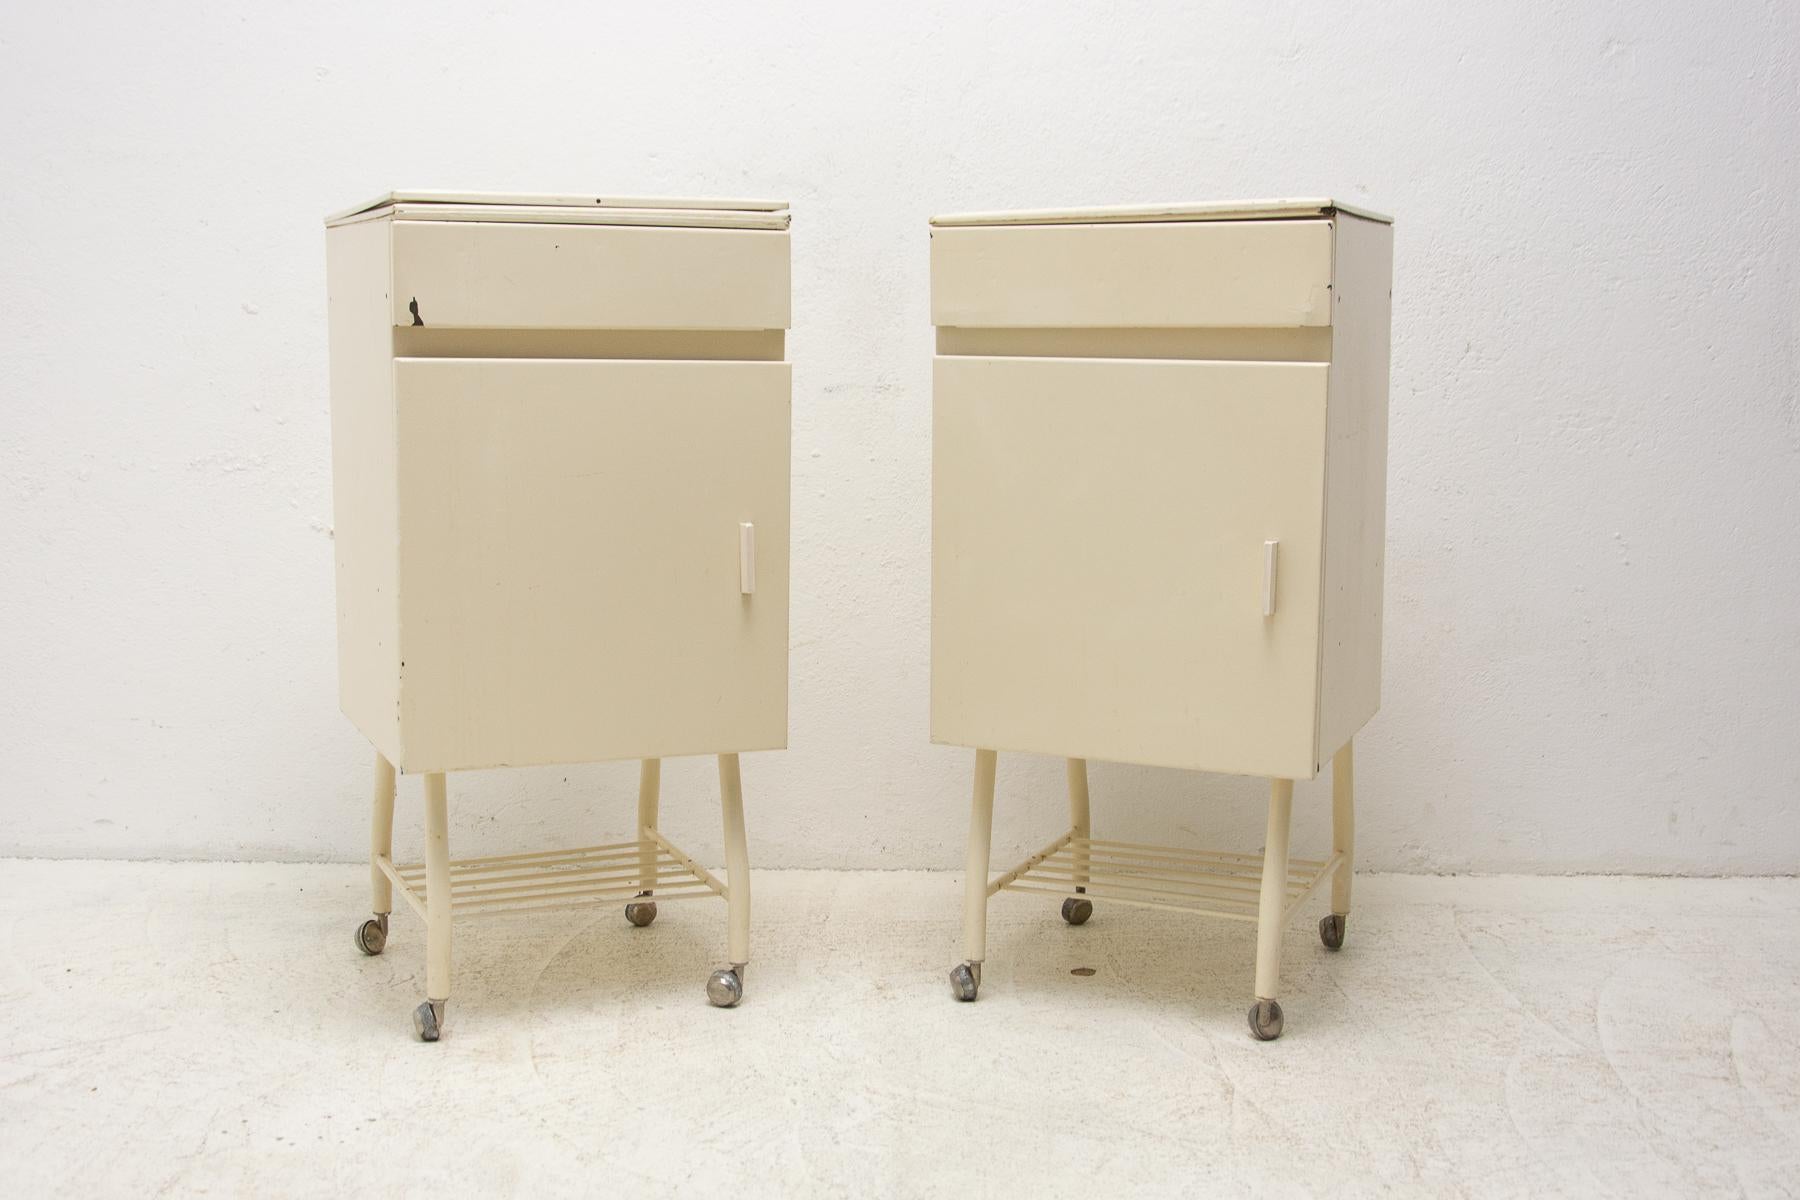 Pair of Tin Industrial Bedside Tables, 1970s, Czechoslovakia For Sale 12